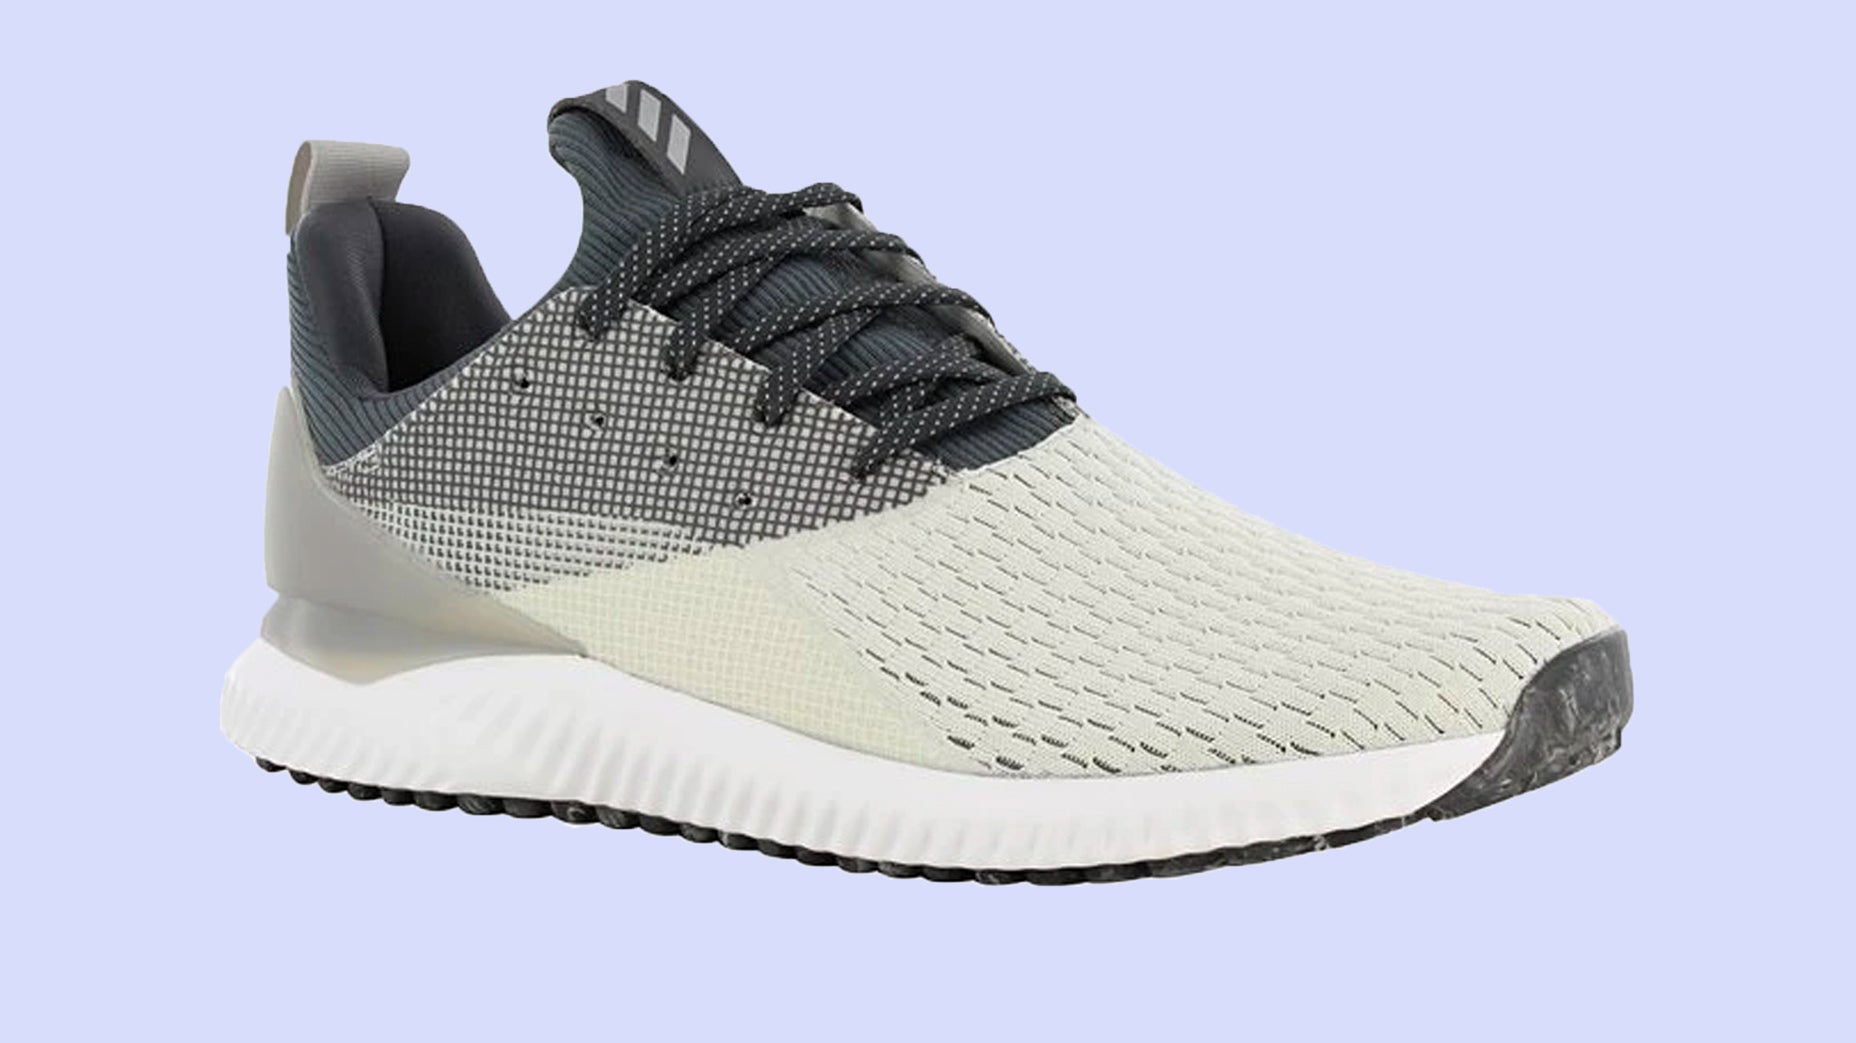 These sporty and casual Adidas Adicross Bounce are the deal of the week